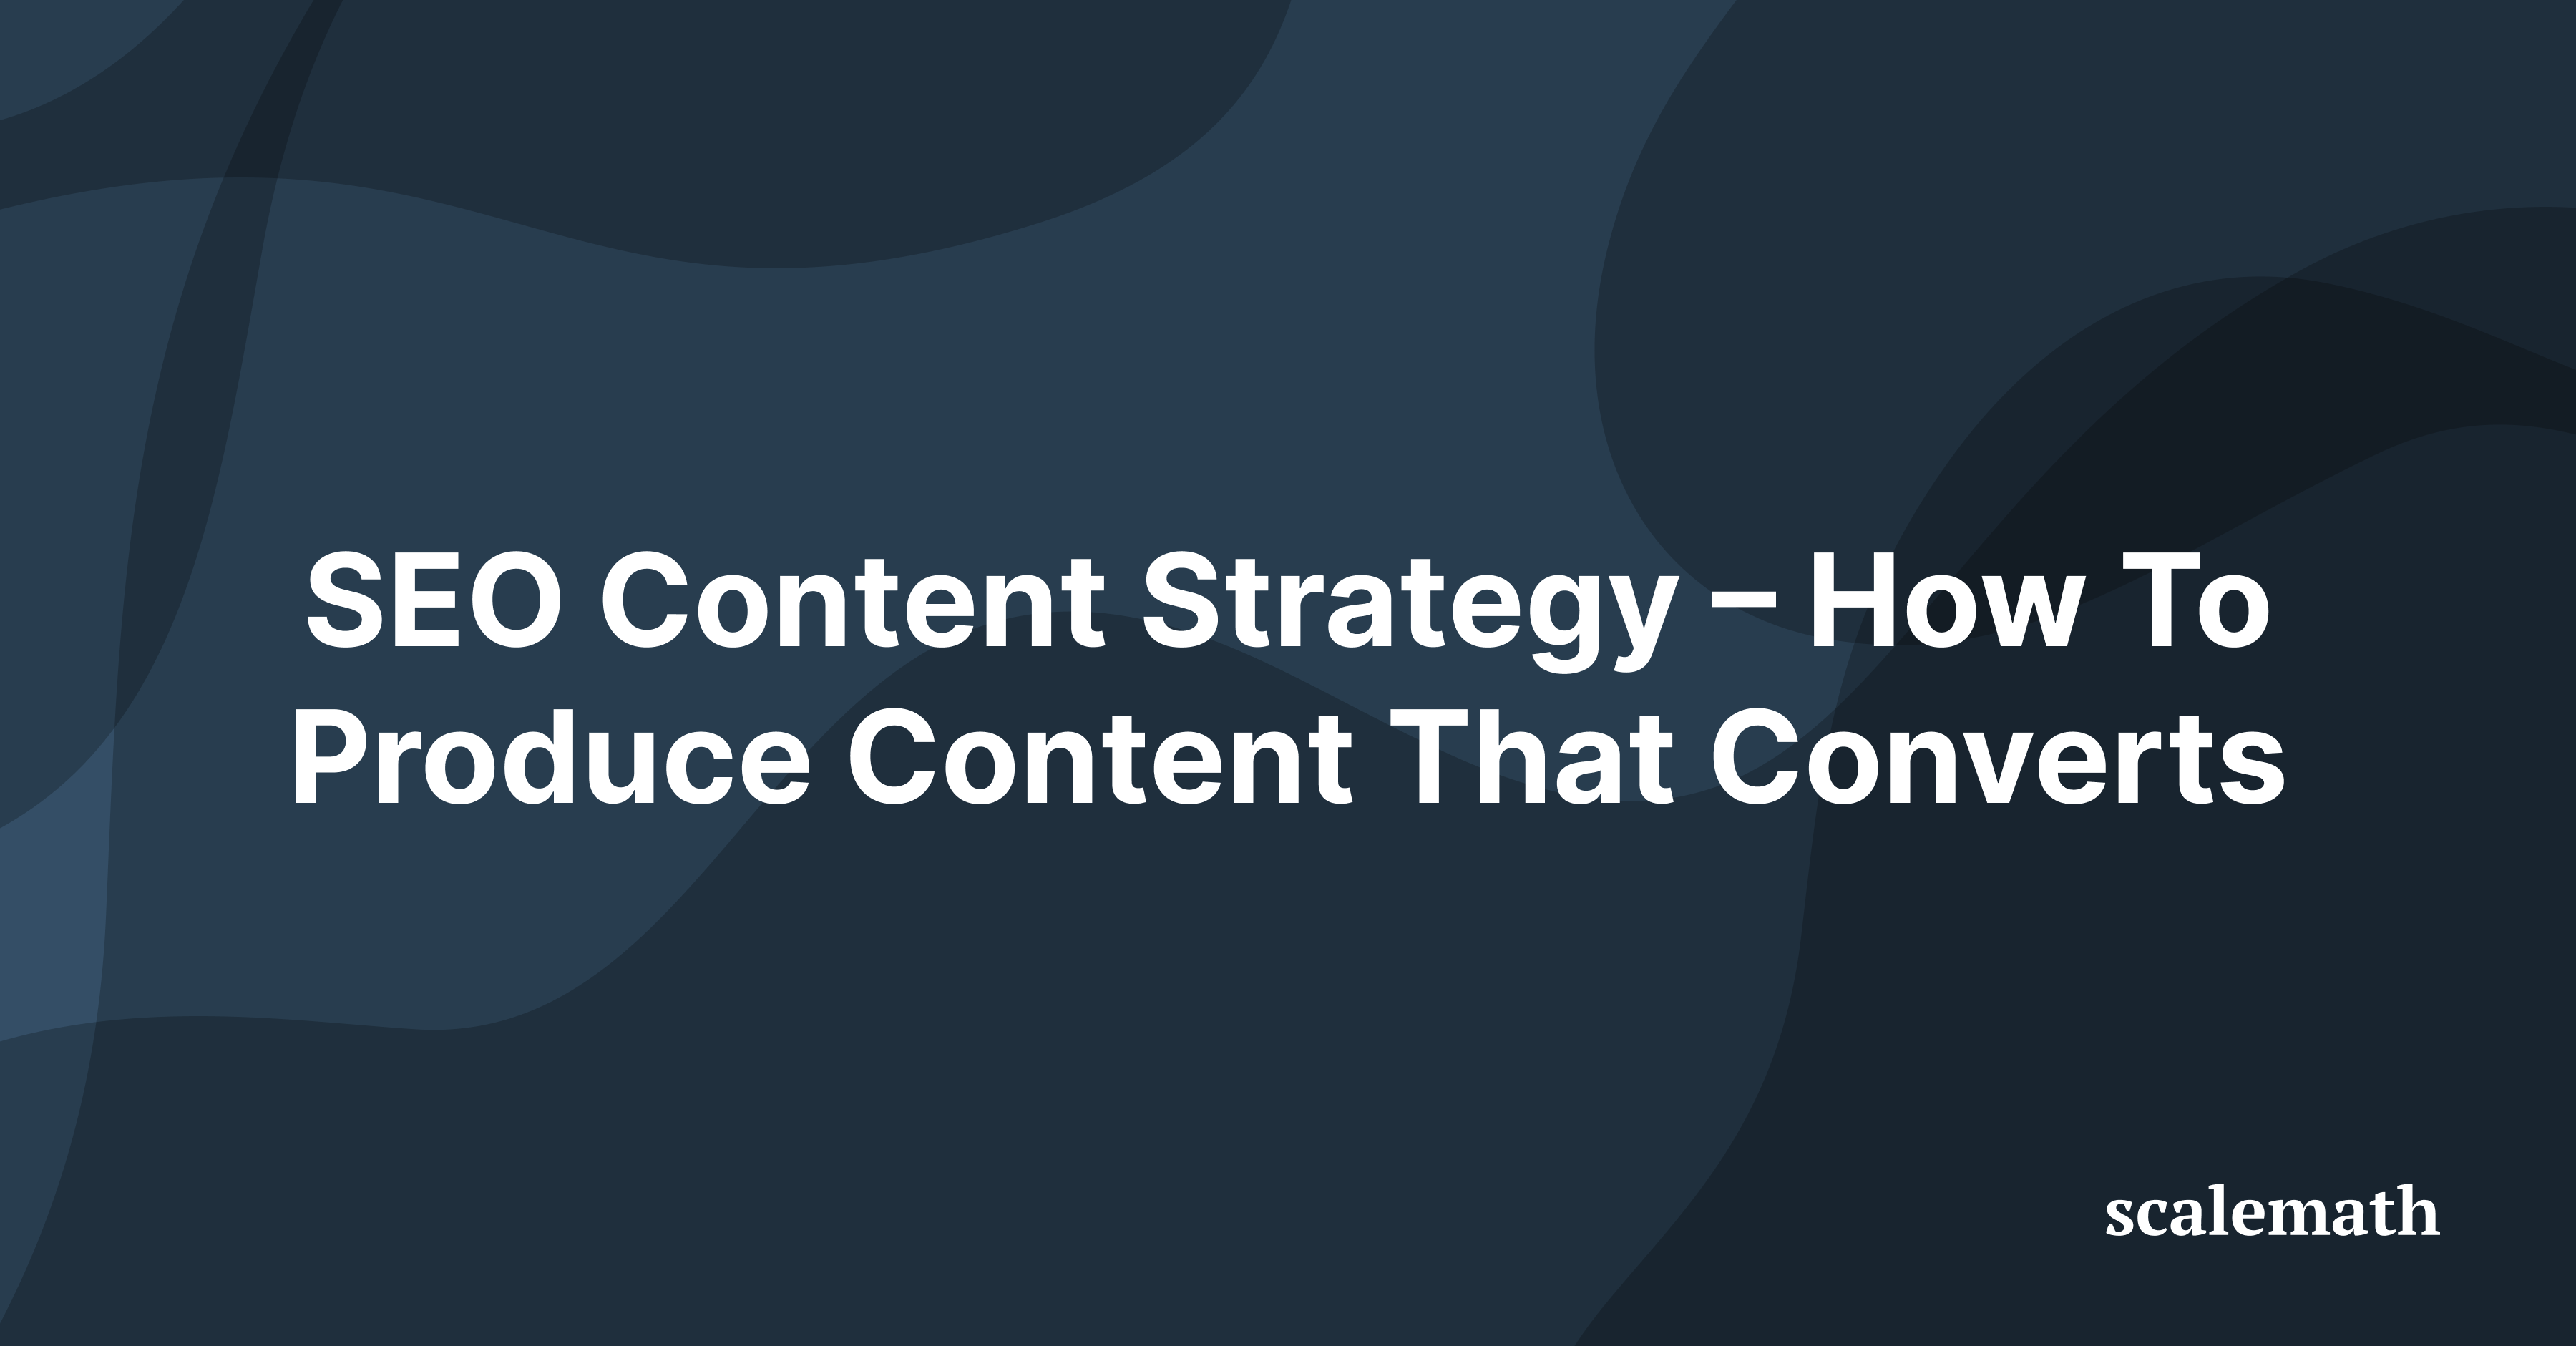 SEO Content Strategy – How To Produce Content That Converts